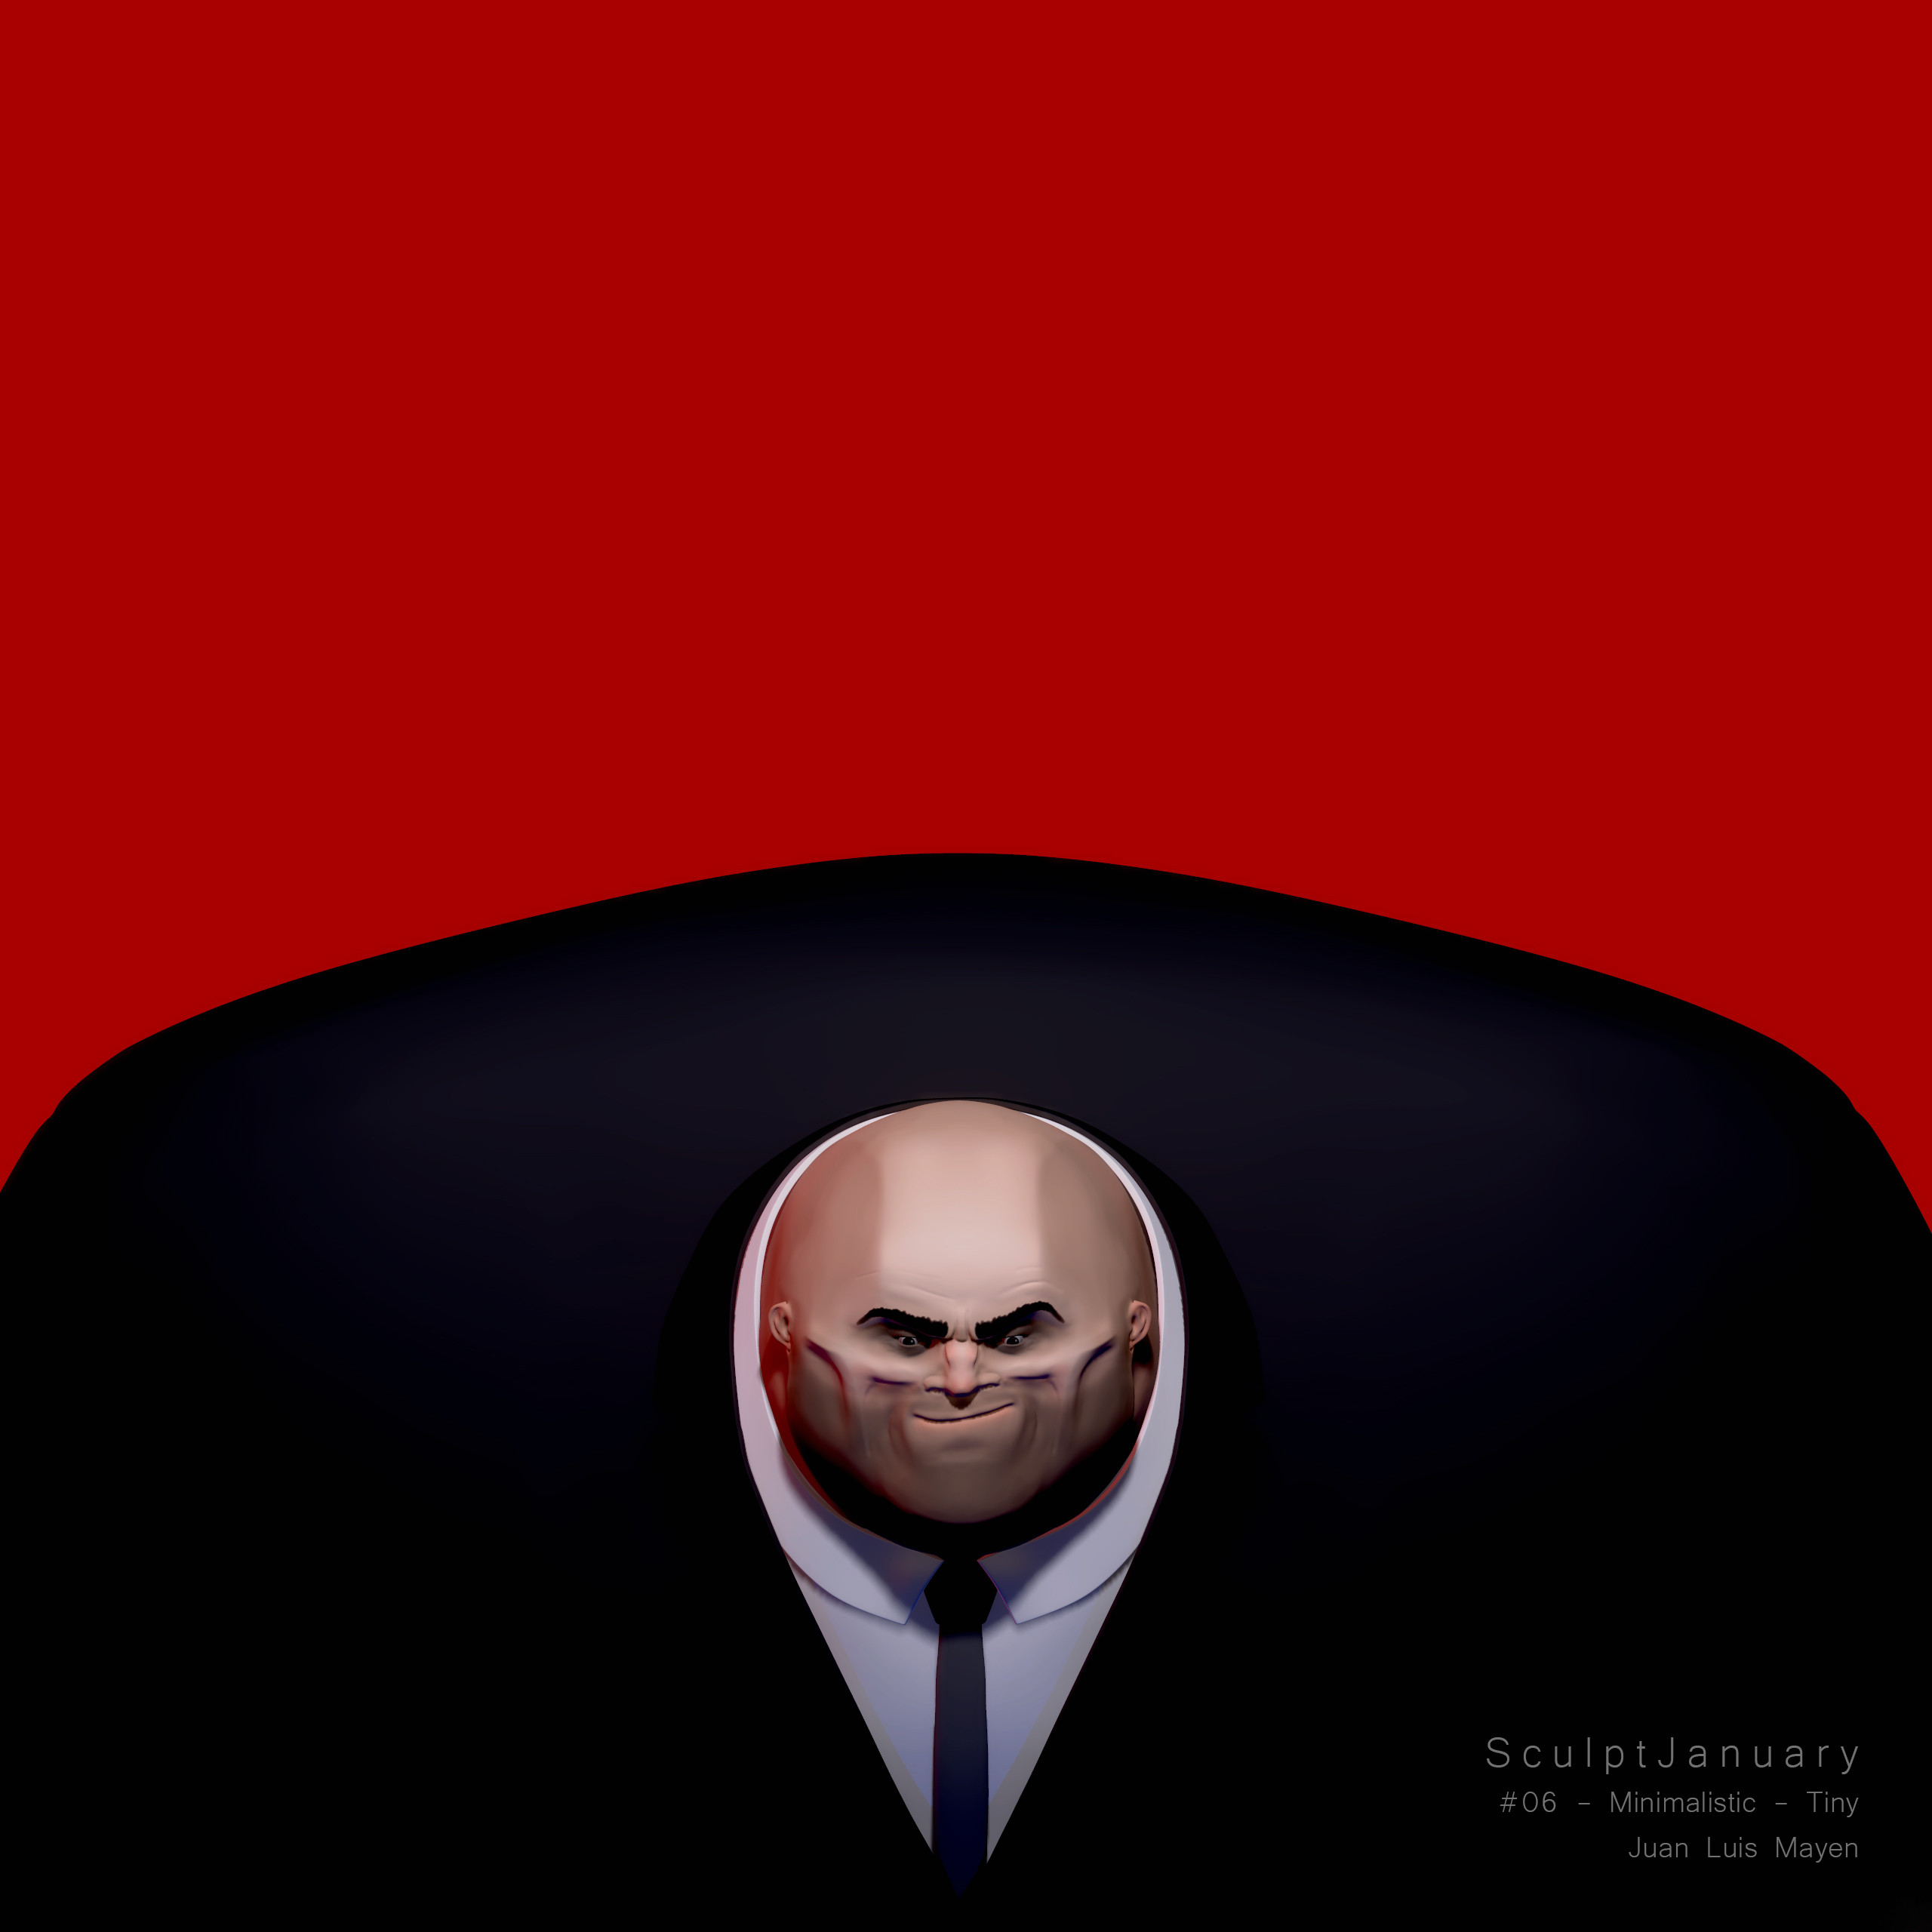 06 - Minimalistic - Tiny
(Fanart of Kingpin from Spiderman: Into the Spiderverse)